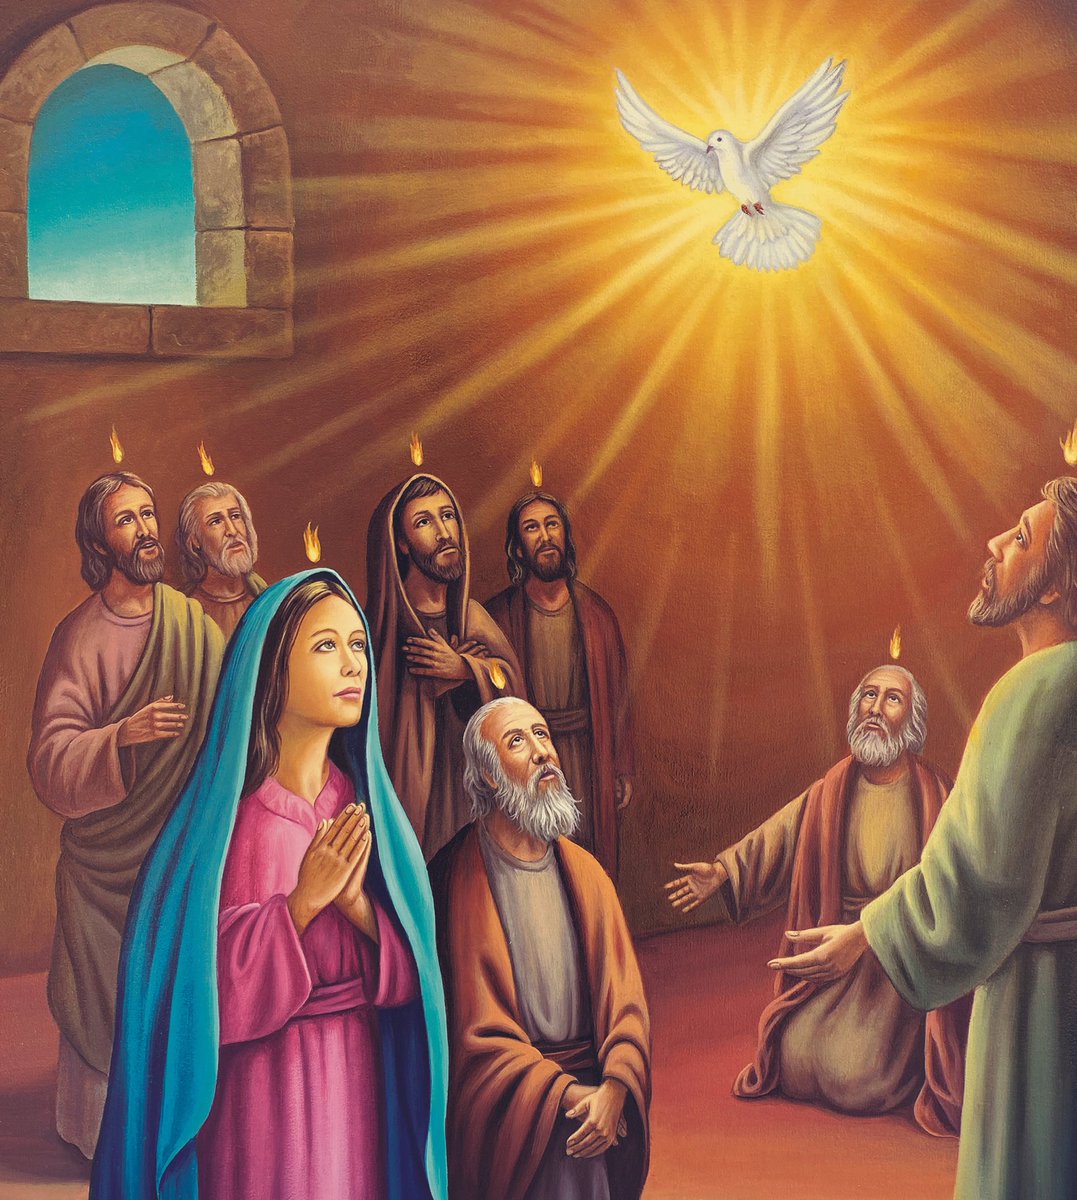 '…The Spirit comes with the tenderness of a true friend and protector to save, to heal, to teach, to counsel, to strengthen, to console.' - #SaintCyrilofJerusalem #PentecostSunday 📷 Pentecostés/Carlos Perez/#Cathopic (CC0 1.0). #Catholic_Priest #CatholicPriestMedia #Pentecost